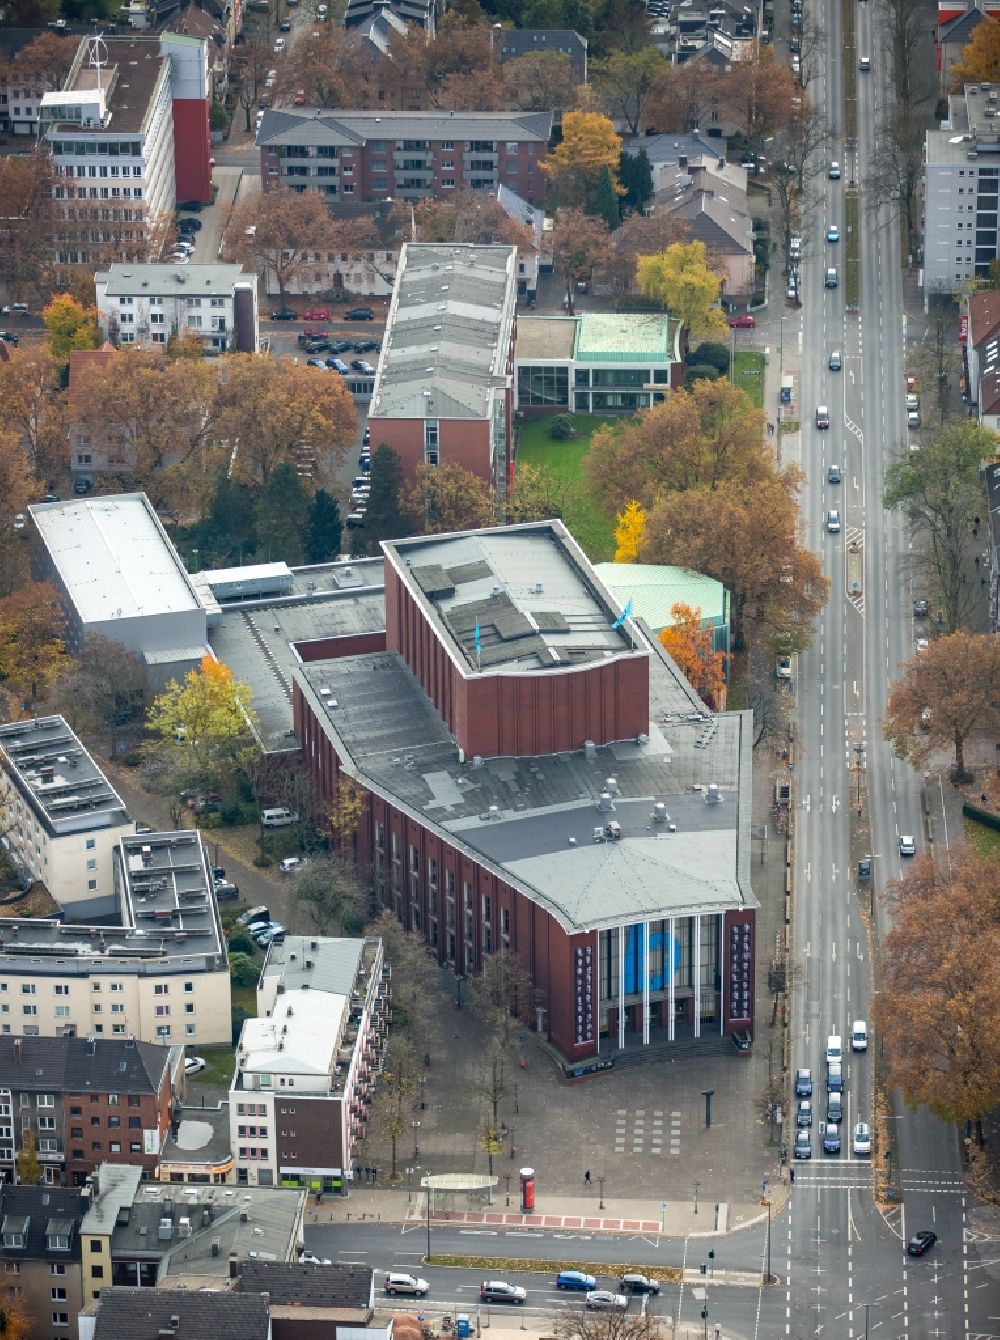 Aerial photograph Bochum - Theatre Bochum in Bochum in the state of North Rhine-Westphalia. In the Background the tax centre